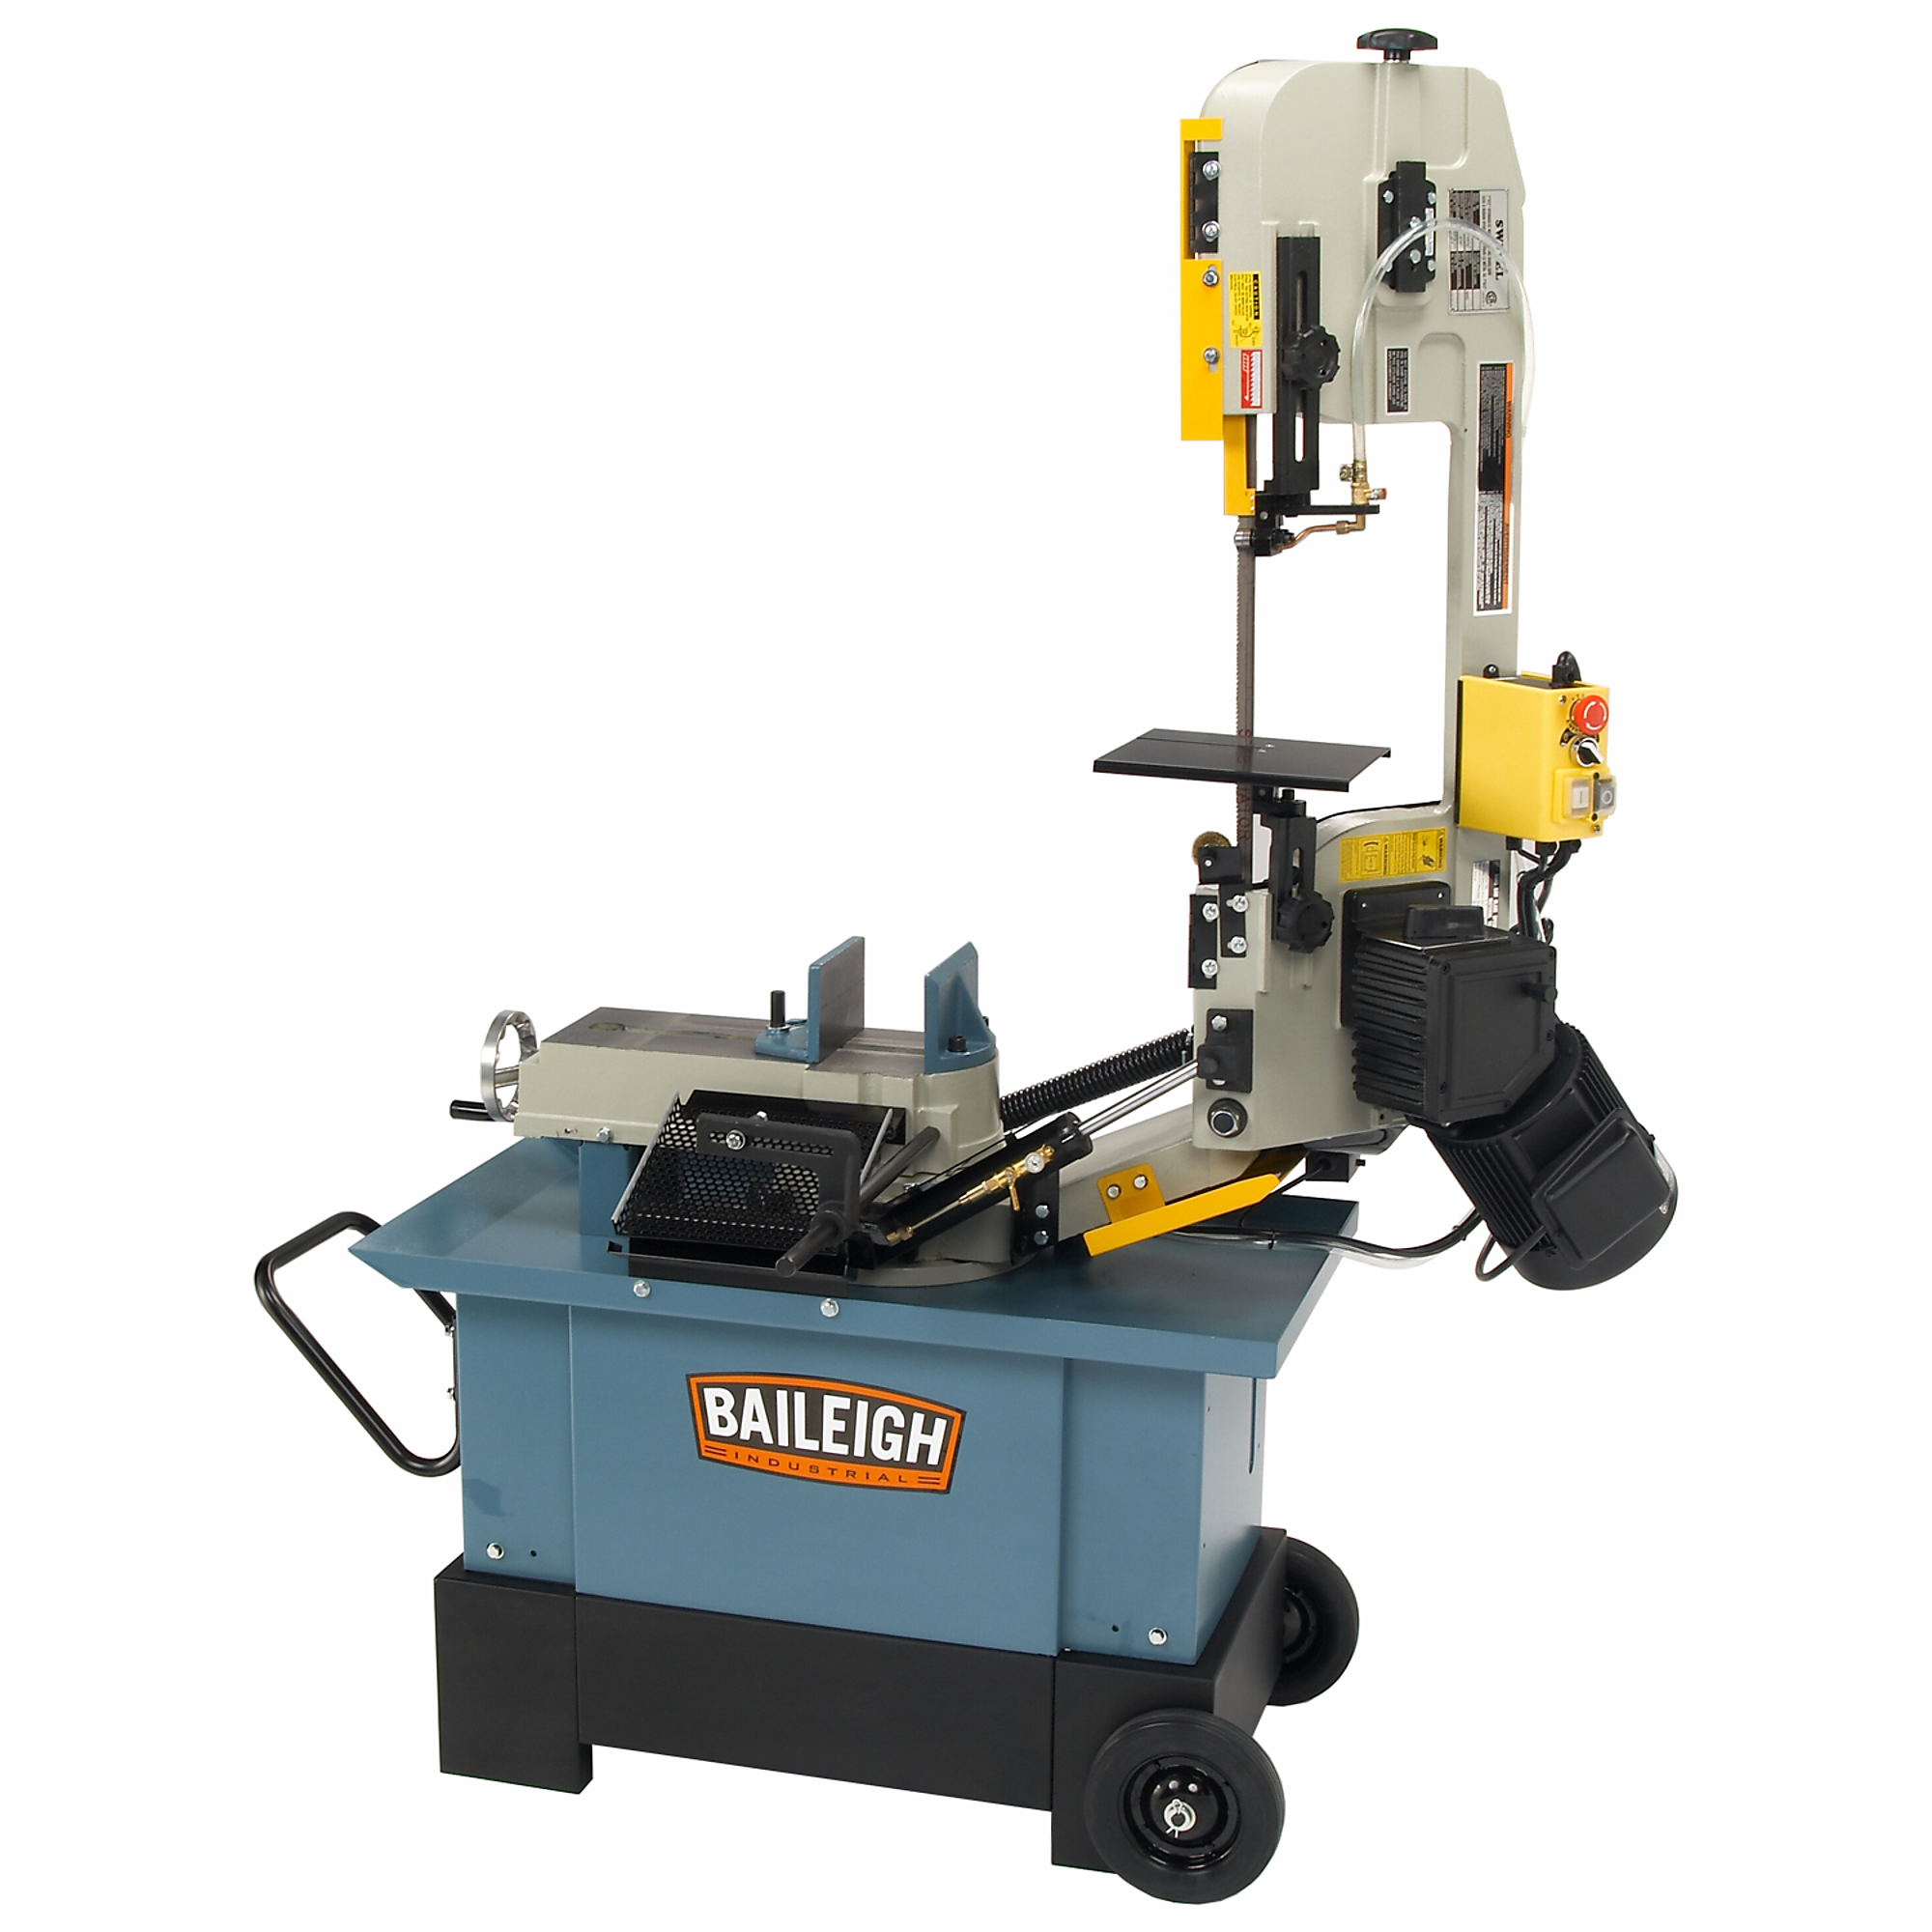 Baileigh, Metal Cutting Saw Vertical Cutting Option, Horsepower 1 HP, Volts 120 Power Type Corded, Model BS-712MS -  1001684